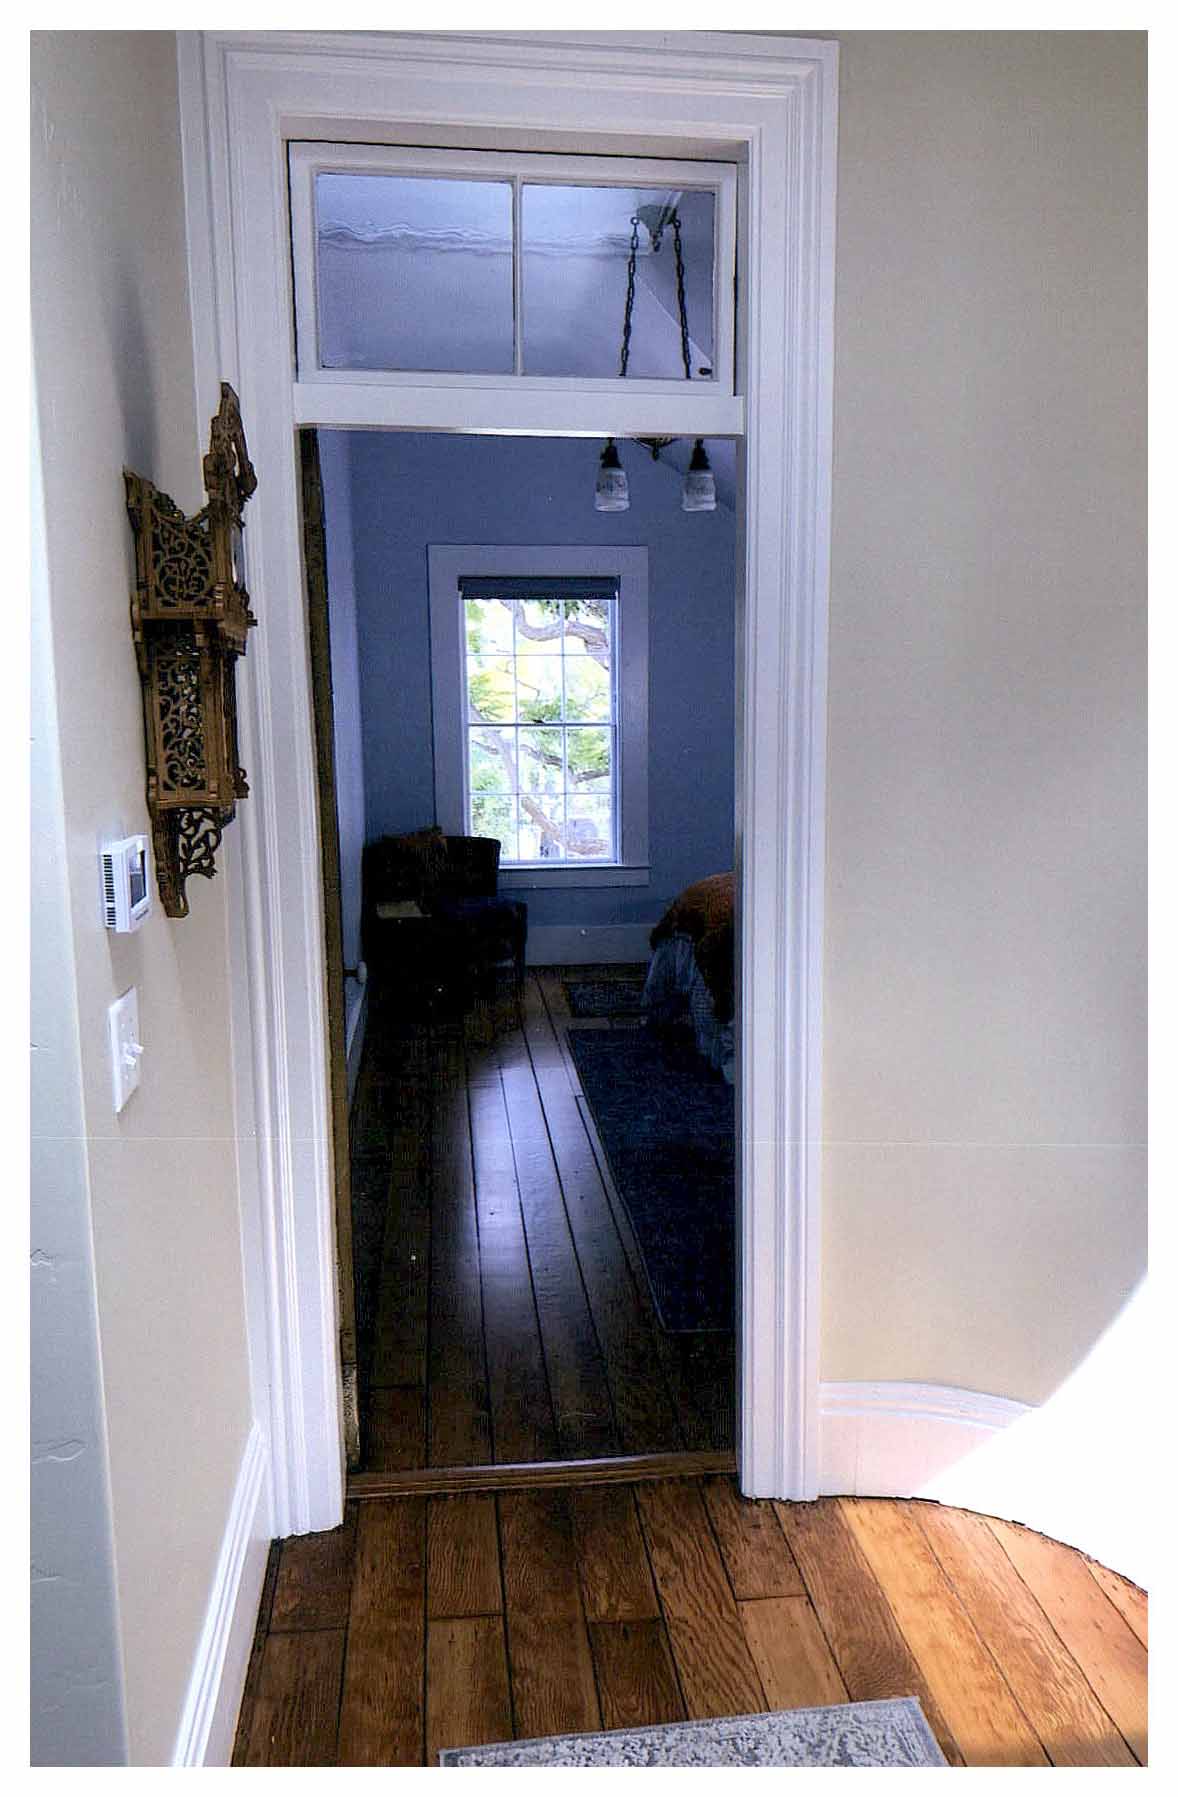 After: view at end of second floor hallway showing the door and transom of another bedroom adjacent to a unique rounded corner. Hallway walls are a light cream color.